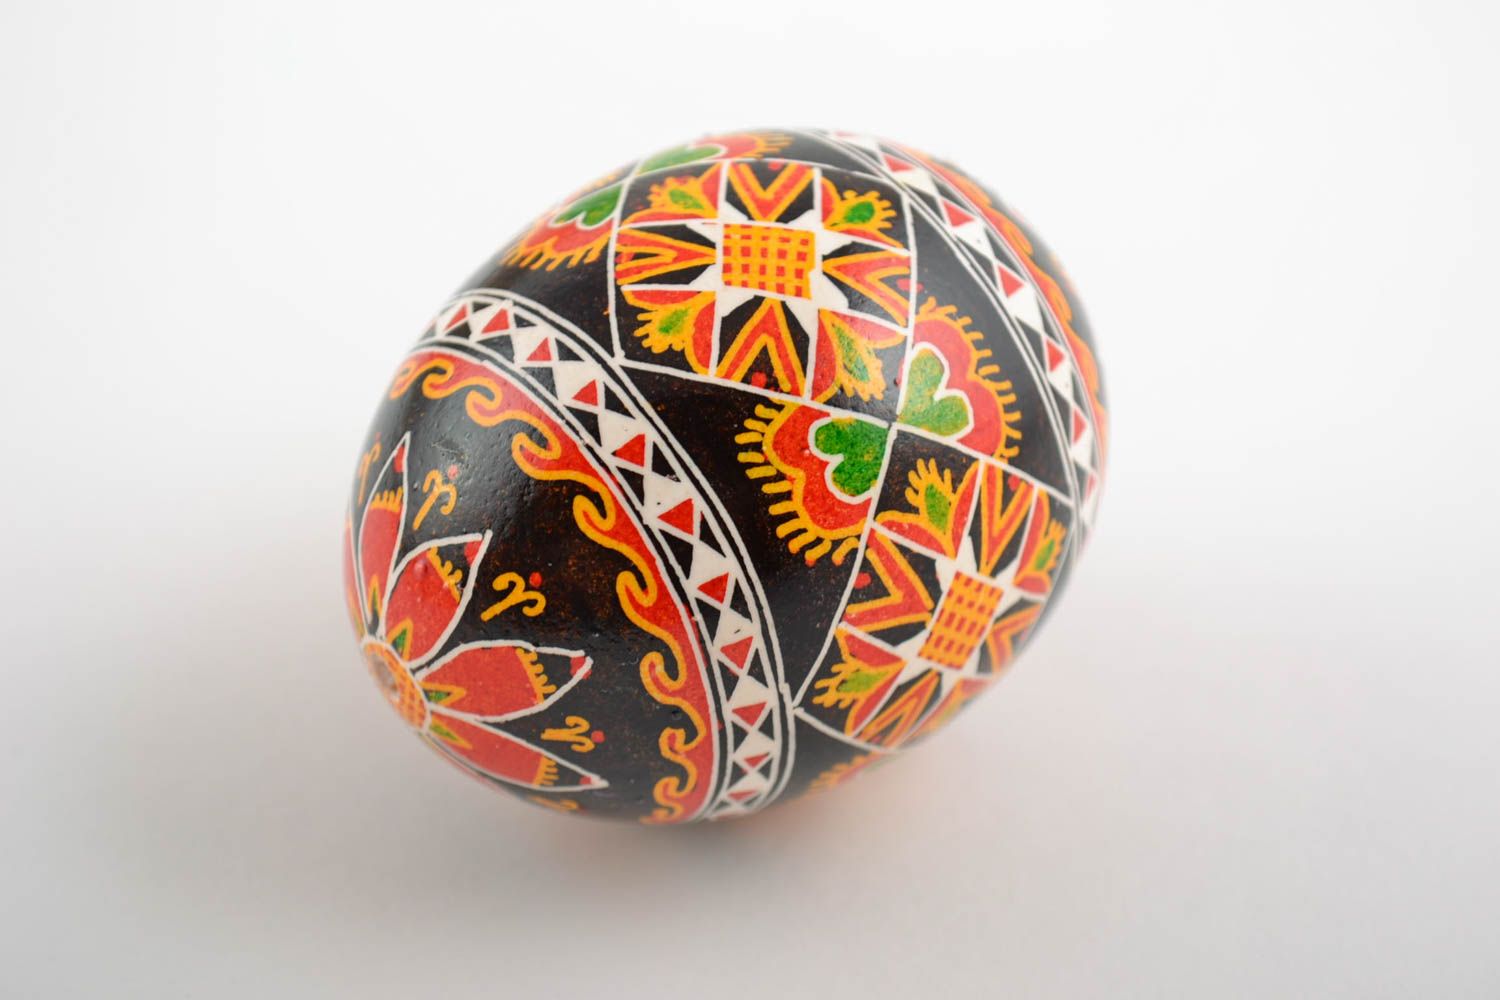 Homemade Easter egg decorative traditional pysanka with acrylic painting photo 4